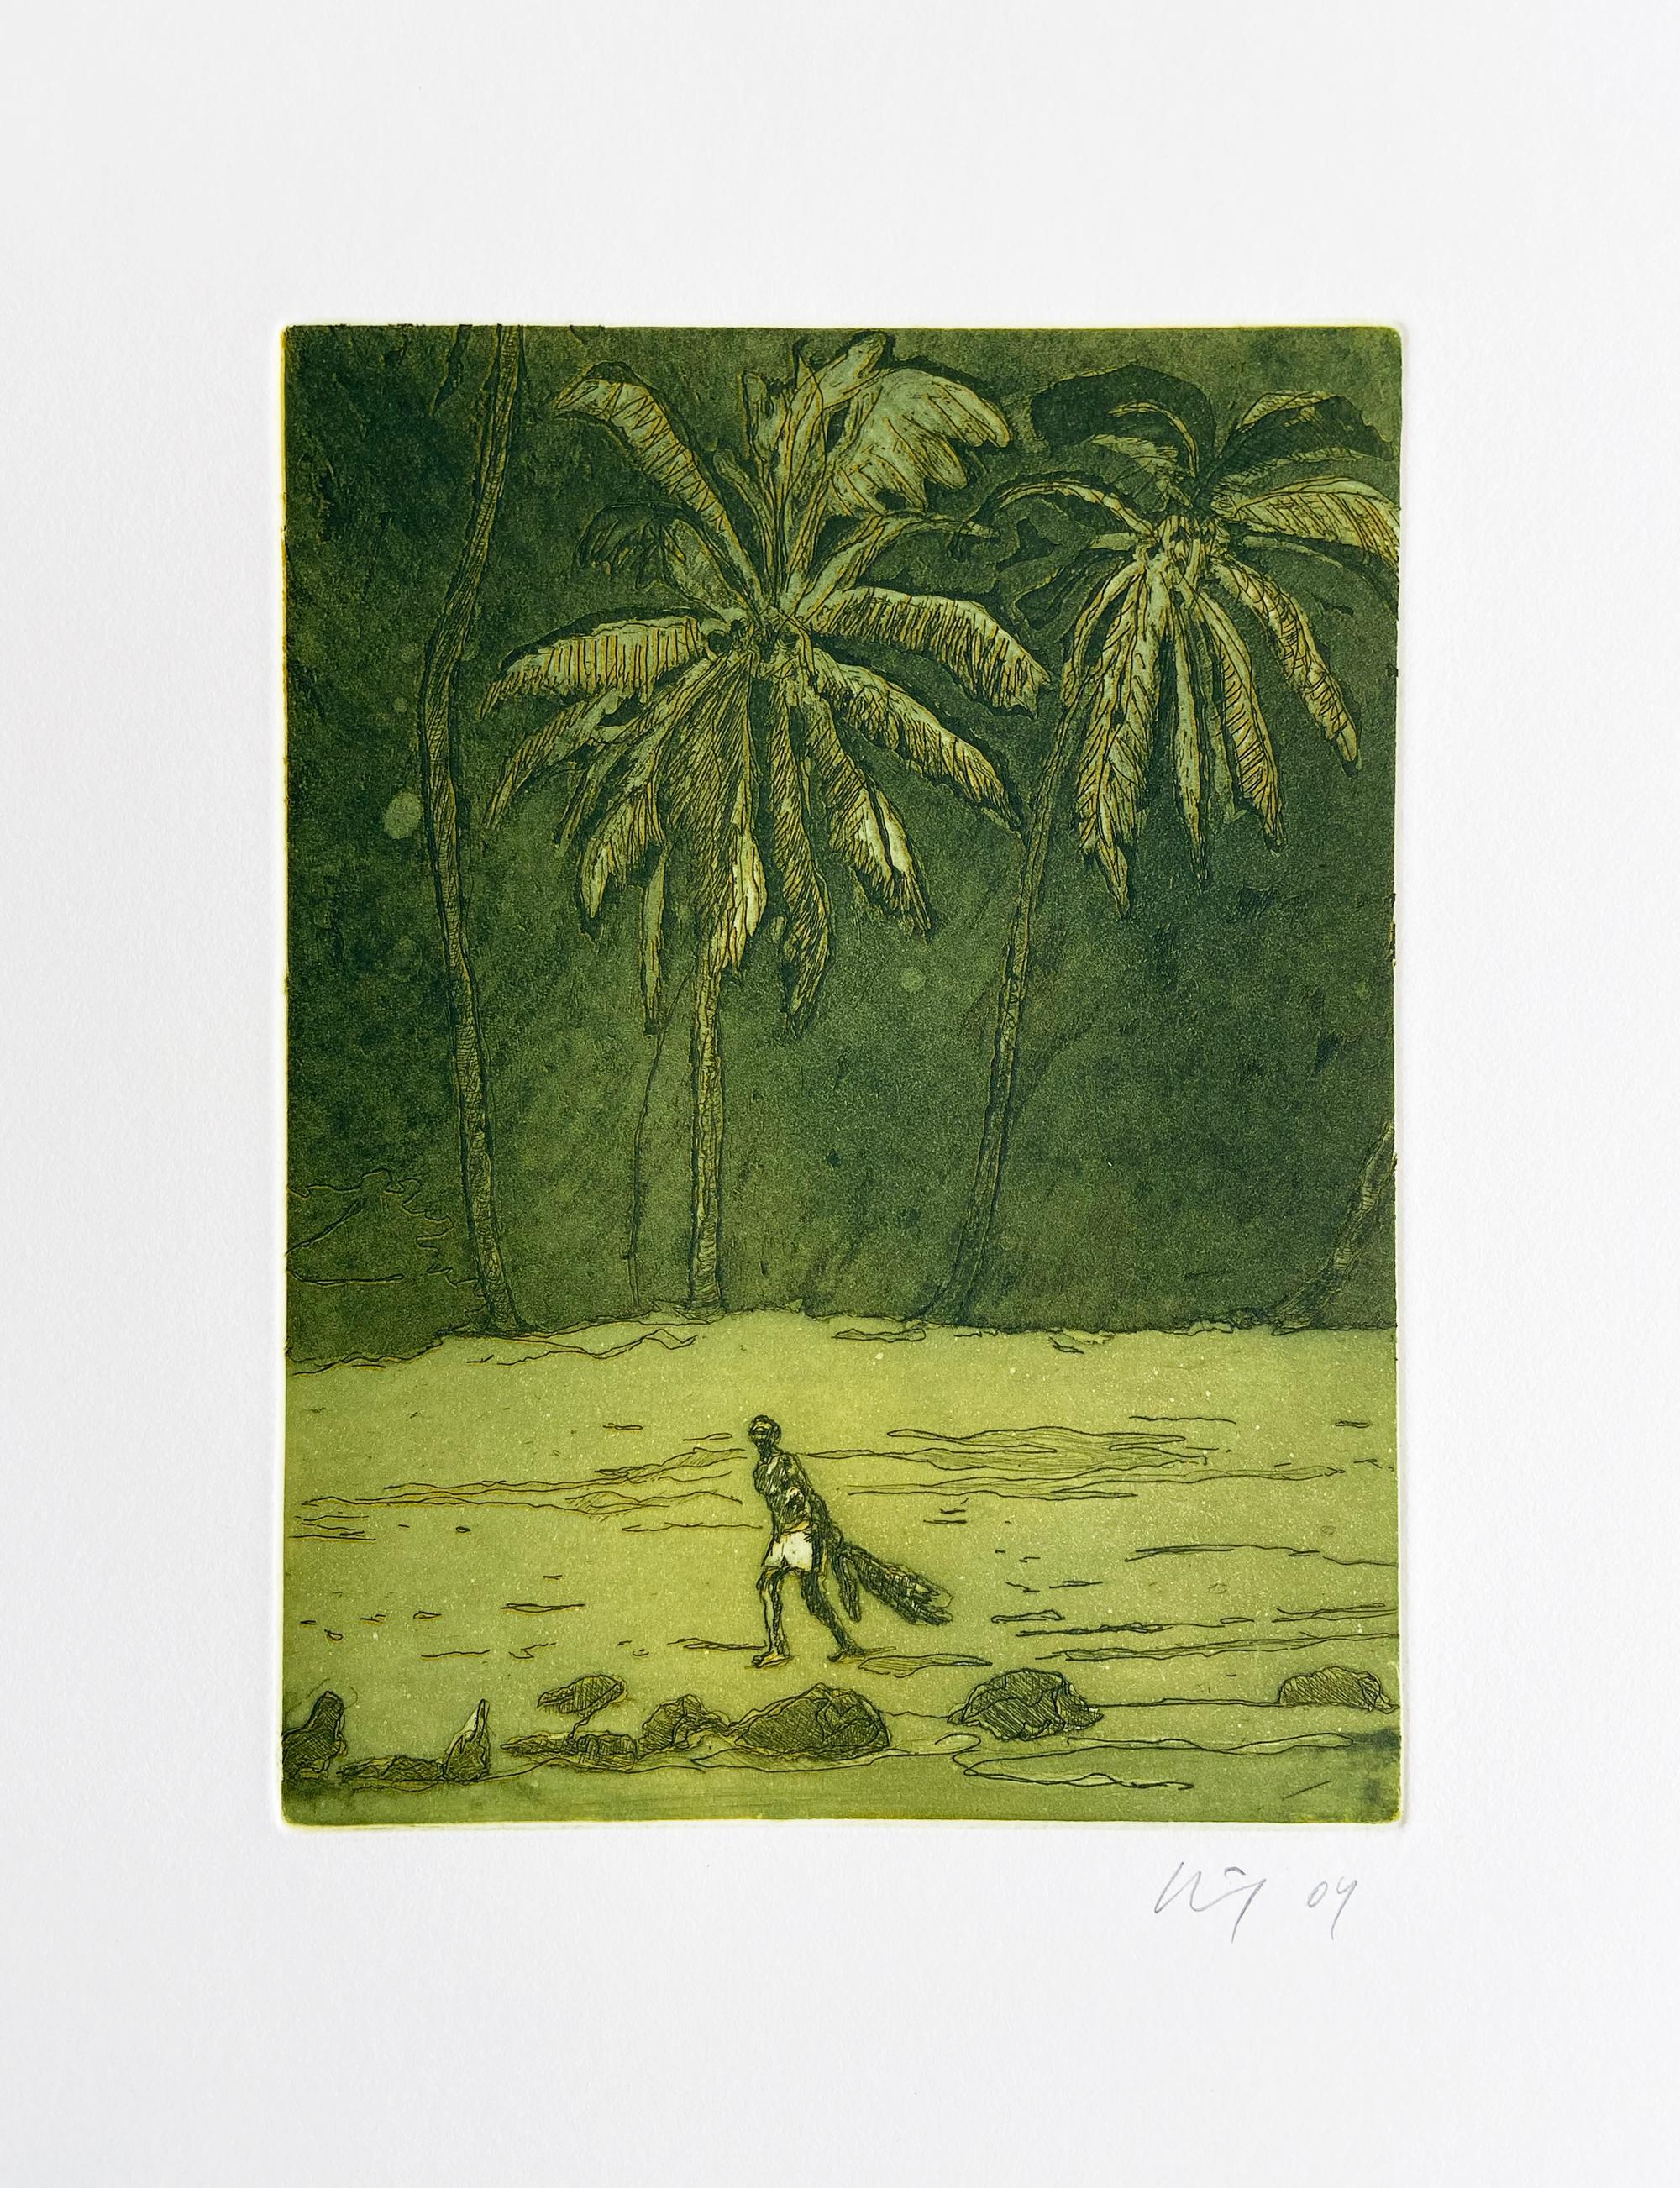 Pelican, from Black Palms, Etching, British Art, Contemporary Art, 21st Century - Print by Peter Doig